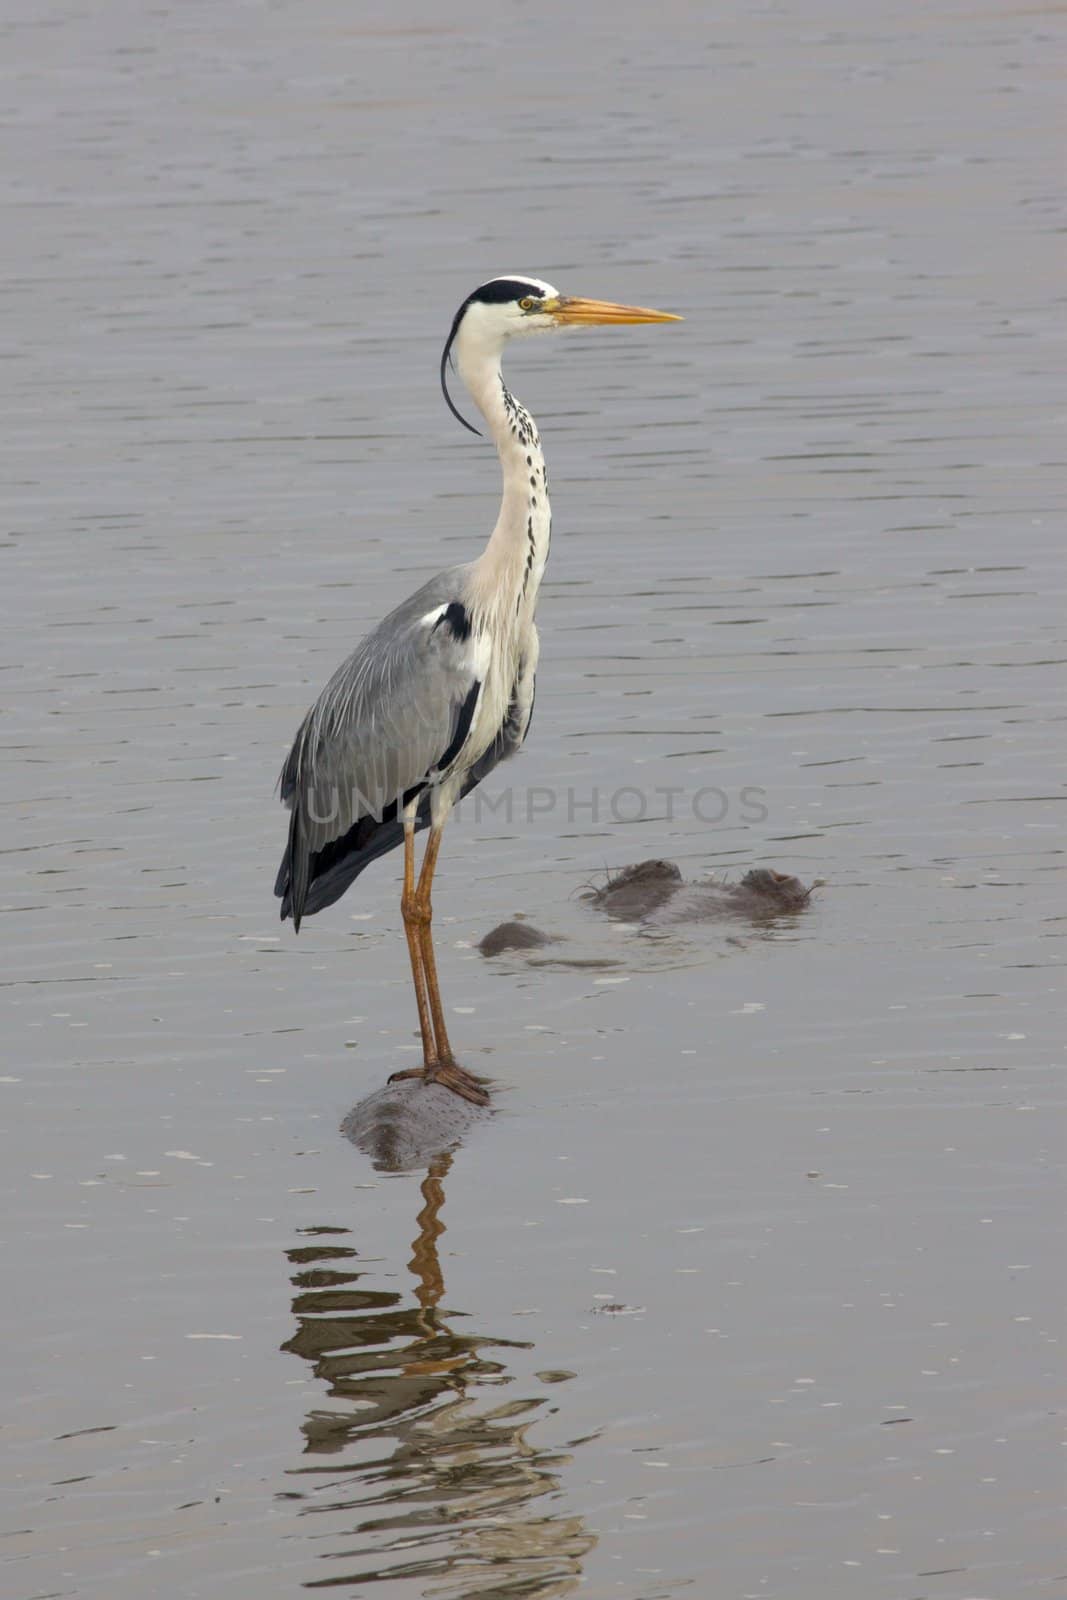 A Grey Heron, perched on the back of a Hippopotamus, in the Kruger National Park, South Africa.